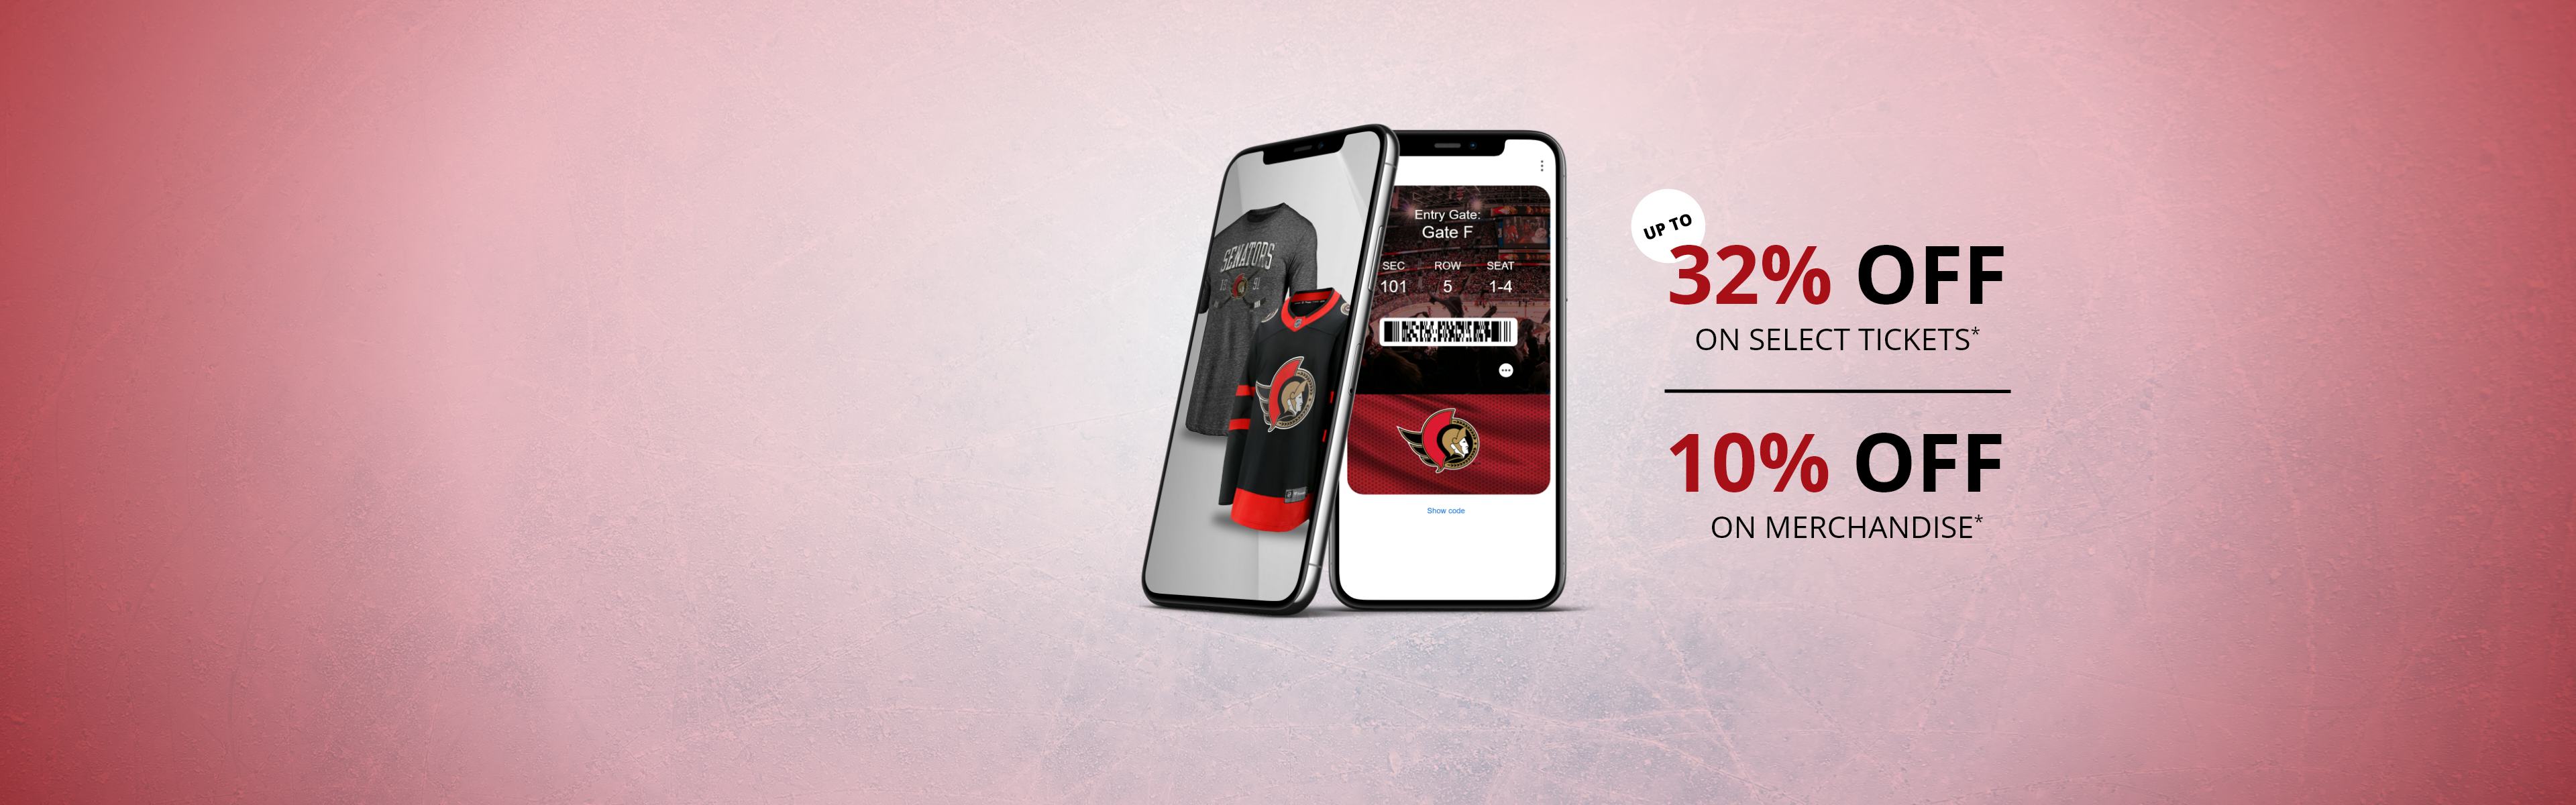 Mobile phone with Sens merchandise and ticket